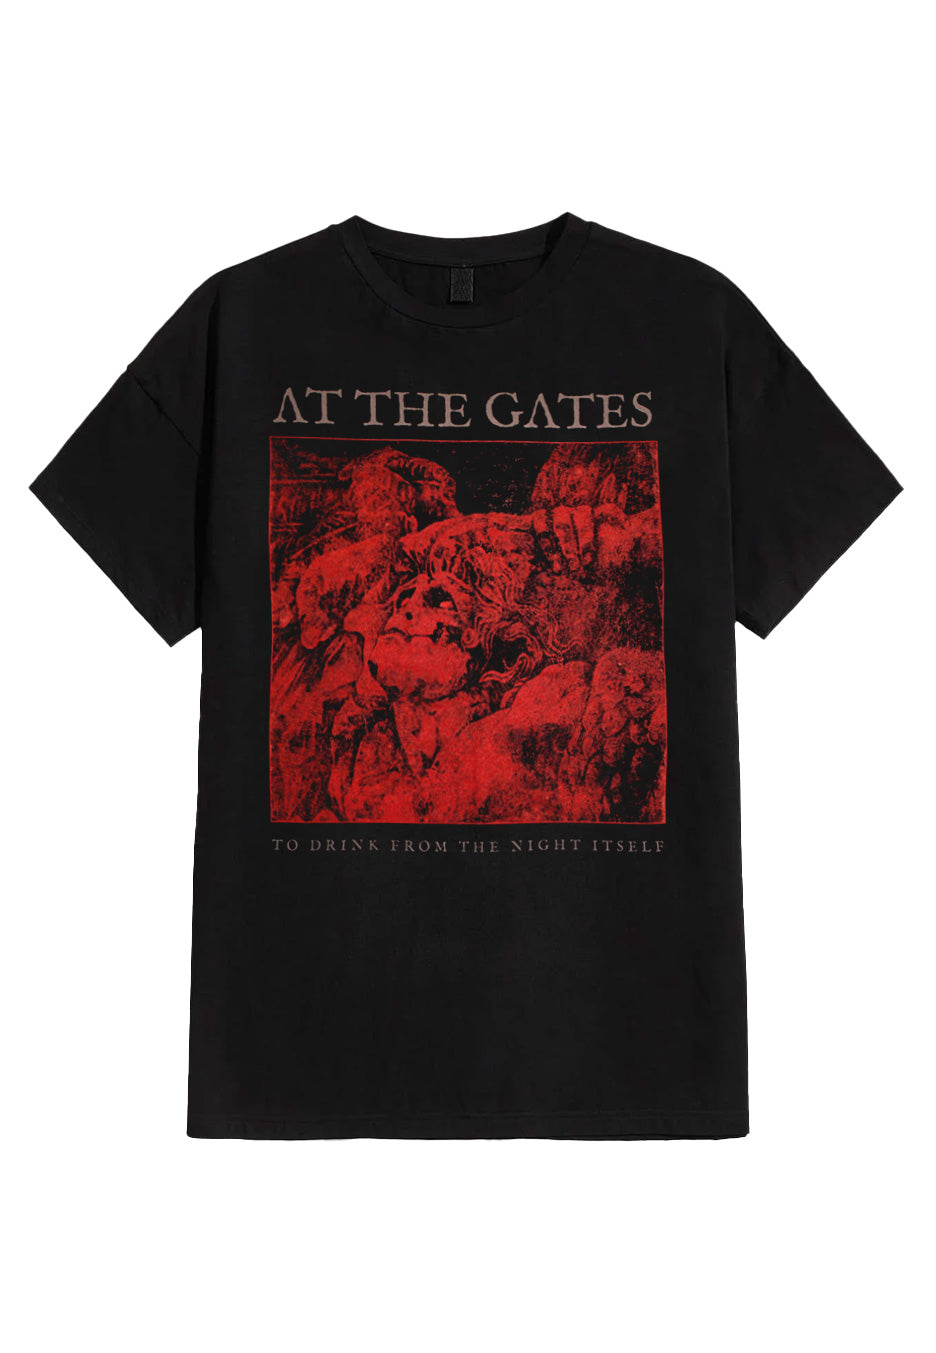 At The Gates - To Drink From The Night Itself - T-Shirt